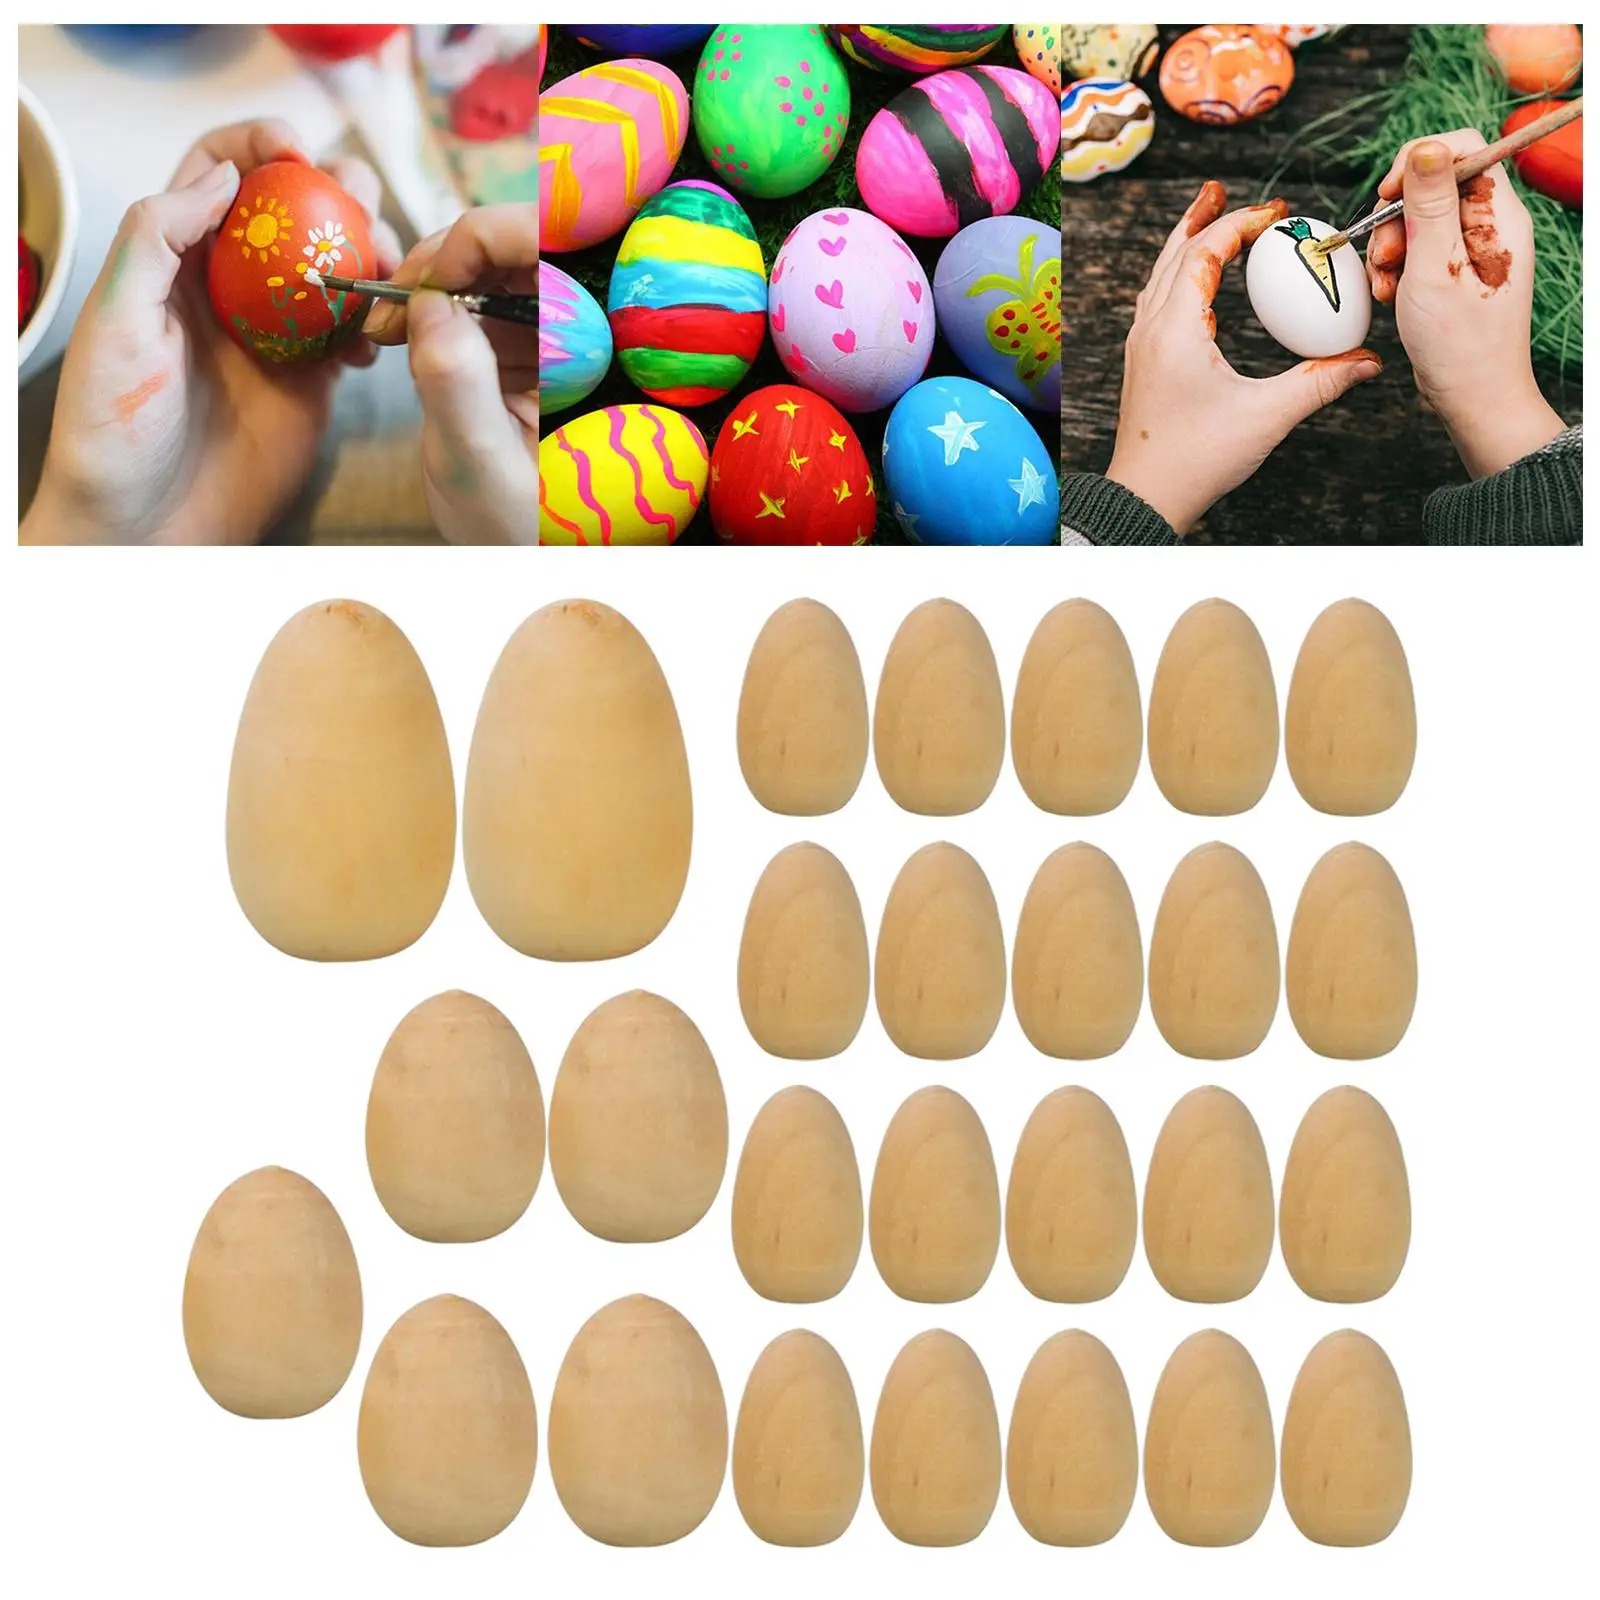 27x Smooth Wooden Blank Eggs Painted Exercise Manual Graffiti Unfinished Wood Eggs with Flat Bottom for Ornament Kids Gifts images - 1